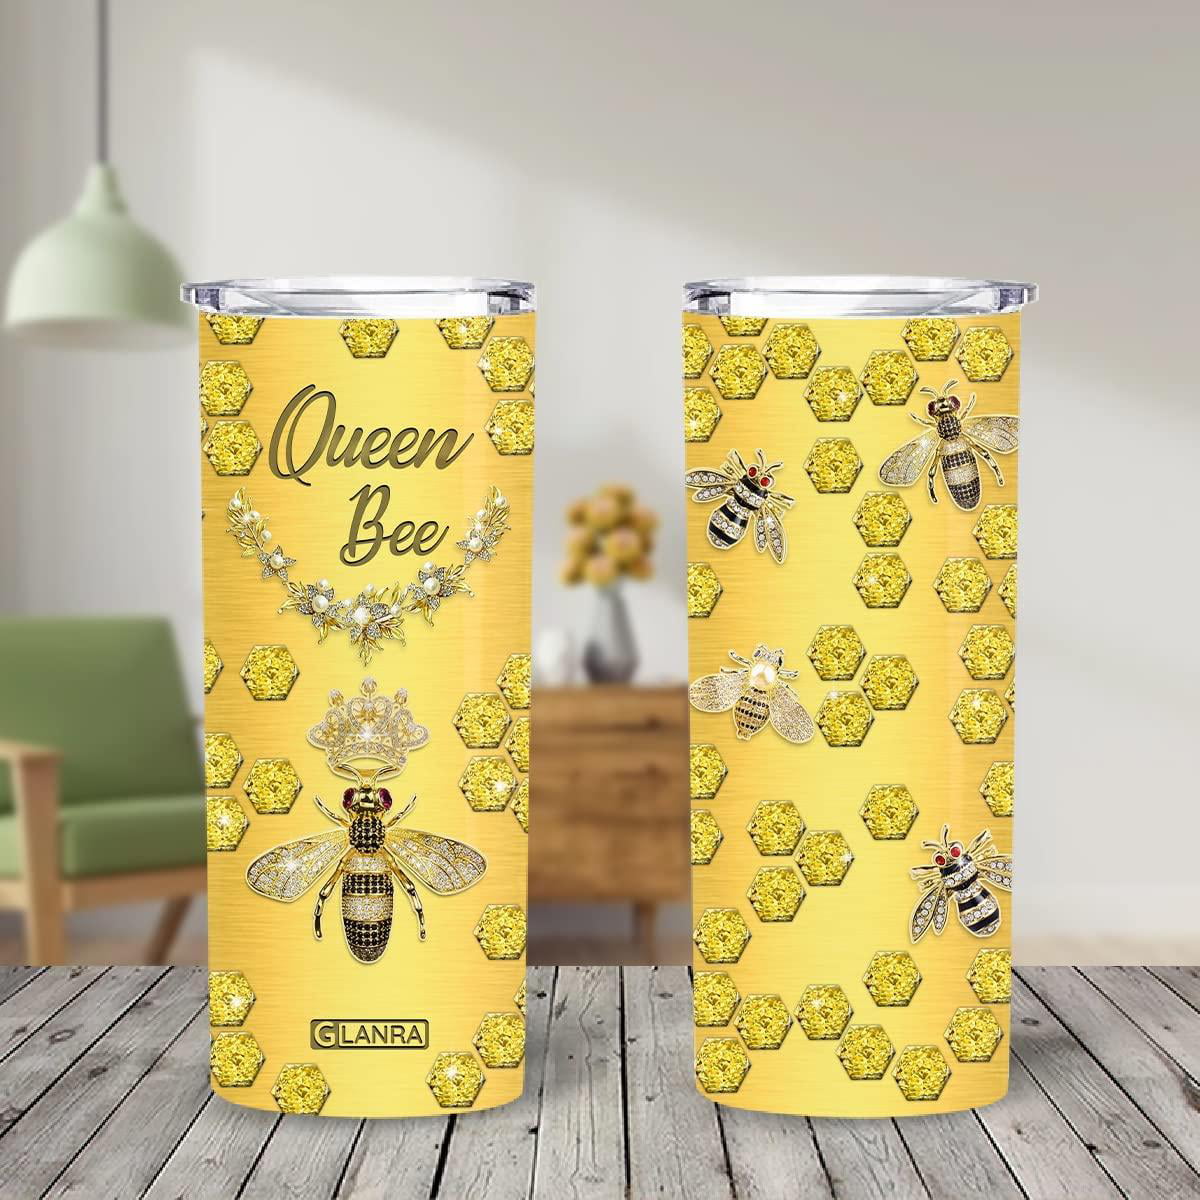 20oz Bee Gifts for Bee Lovers, Valentines Day Gifts for Her, Birthday Gifts  for Women, Mom, Friend Gifts for Women Birthday Unique Queen Bee Jewelry  Tumbler Cup, Travel Coffee Mug with Lid 